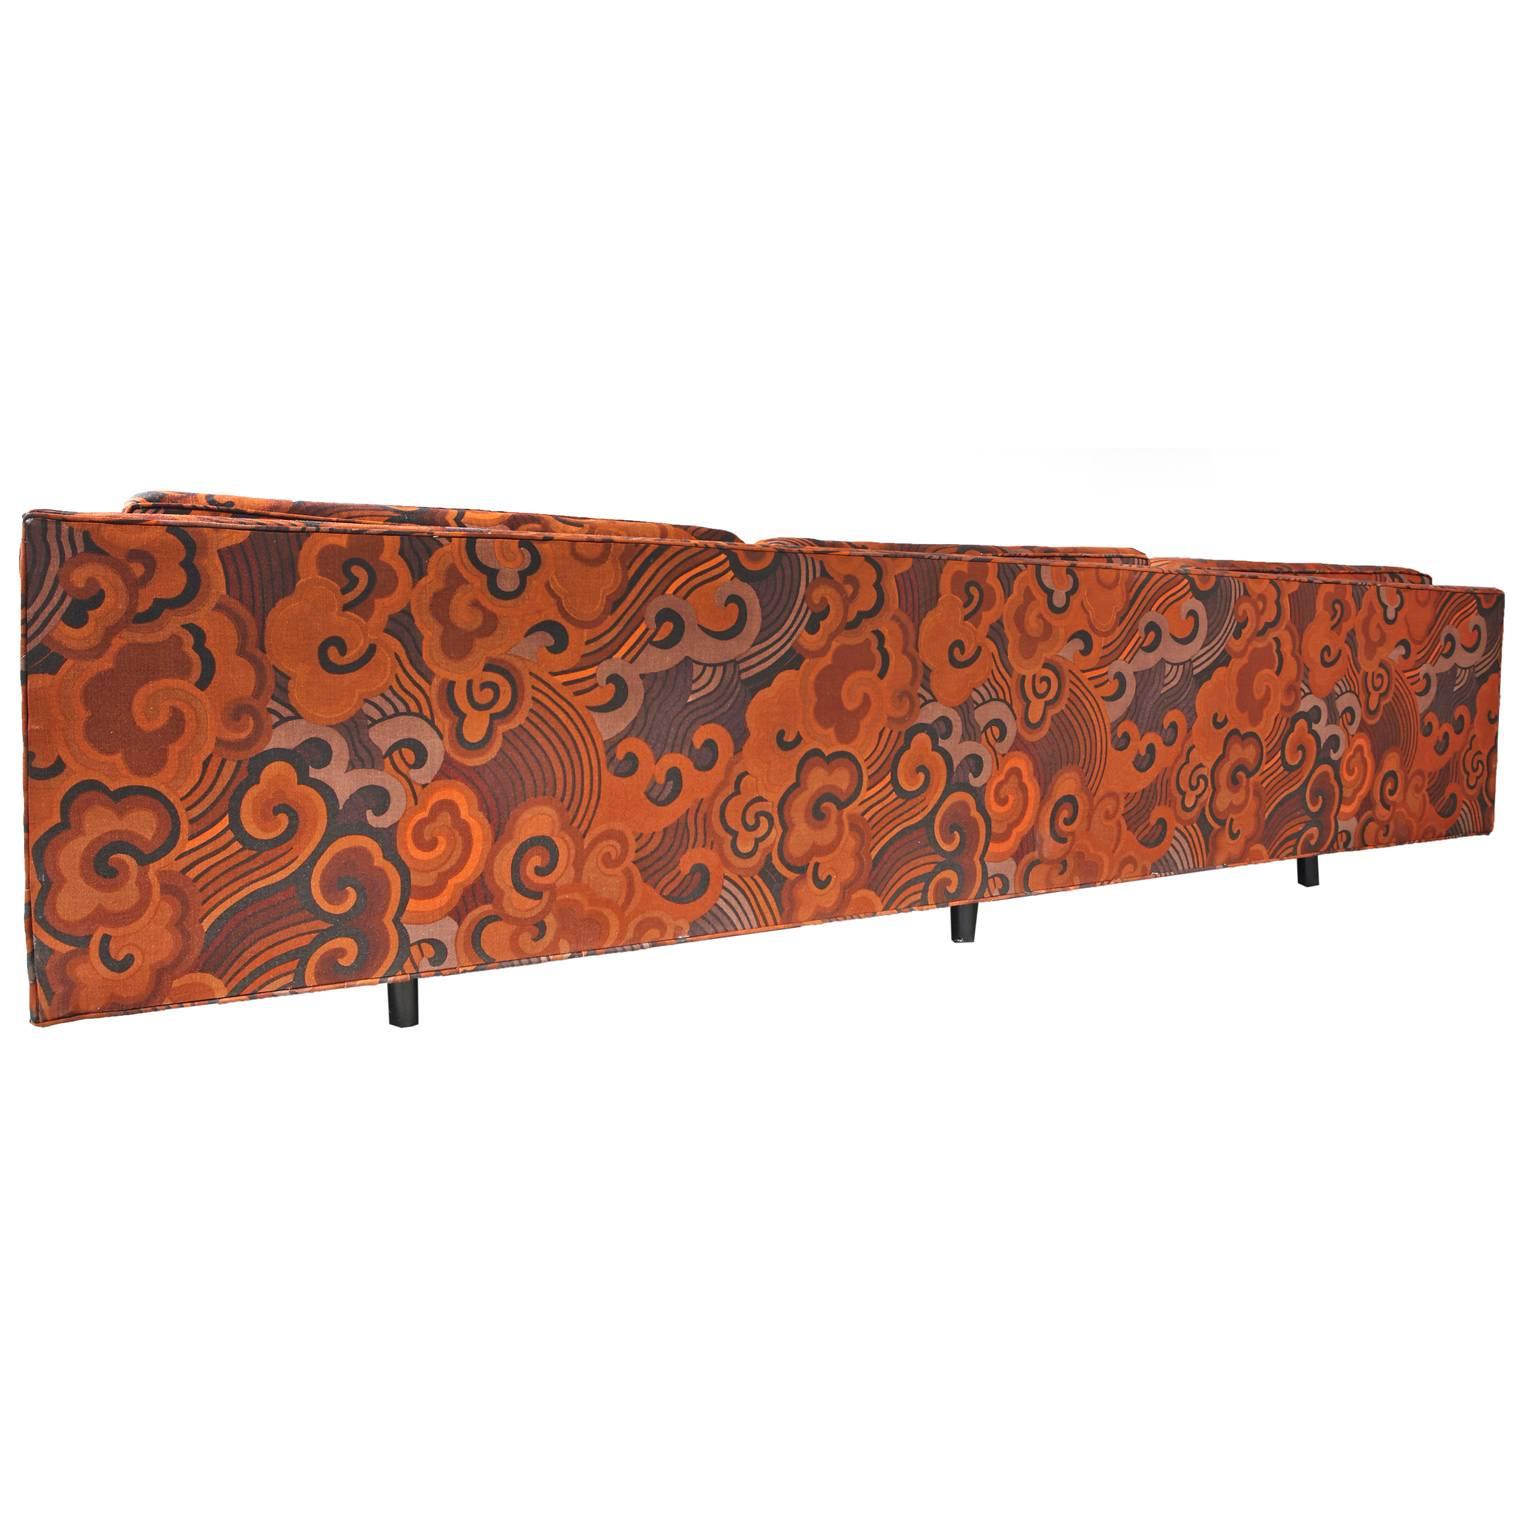 This phenomenal Mid-Century Modern Harvey Probber Tuxedo sofa, is upholstered in Jack Lenor Larson fabric. This upholstery is one of Jack Lenor Larsen's signature fabrics. The design was inspired by a Chinese robe and Ming Dynasty embroideries in